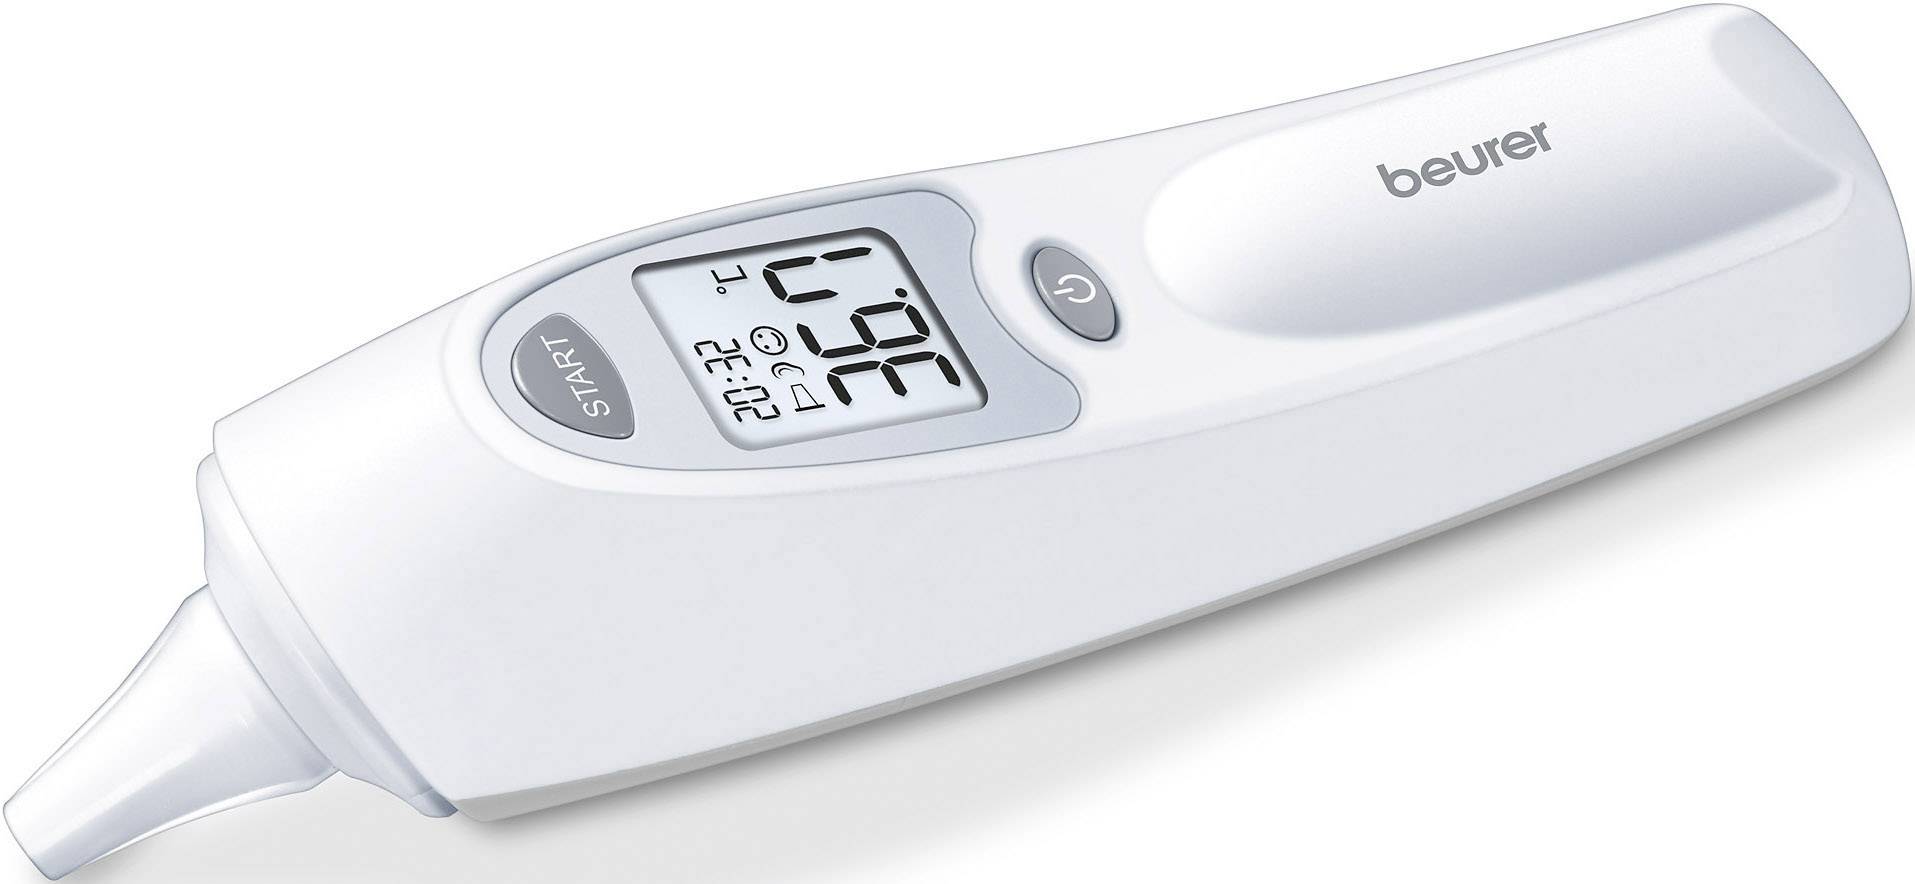 Beurer FT 58 Fever Thermometer